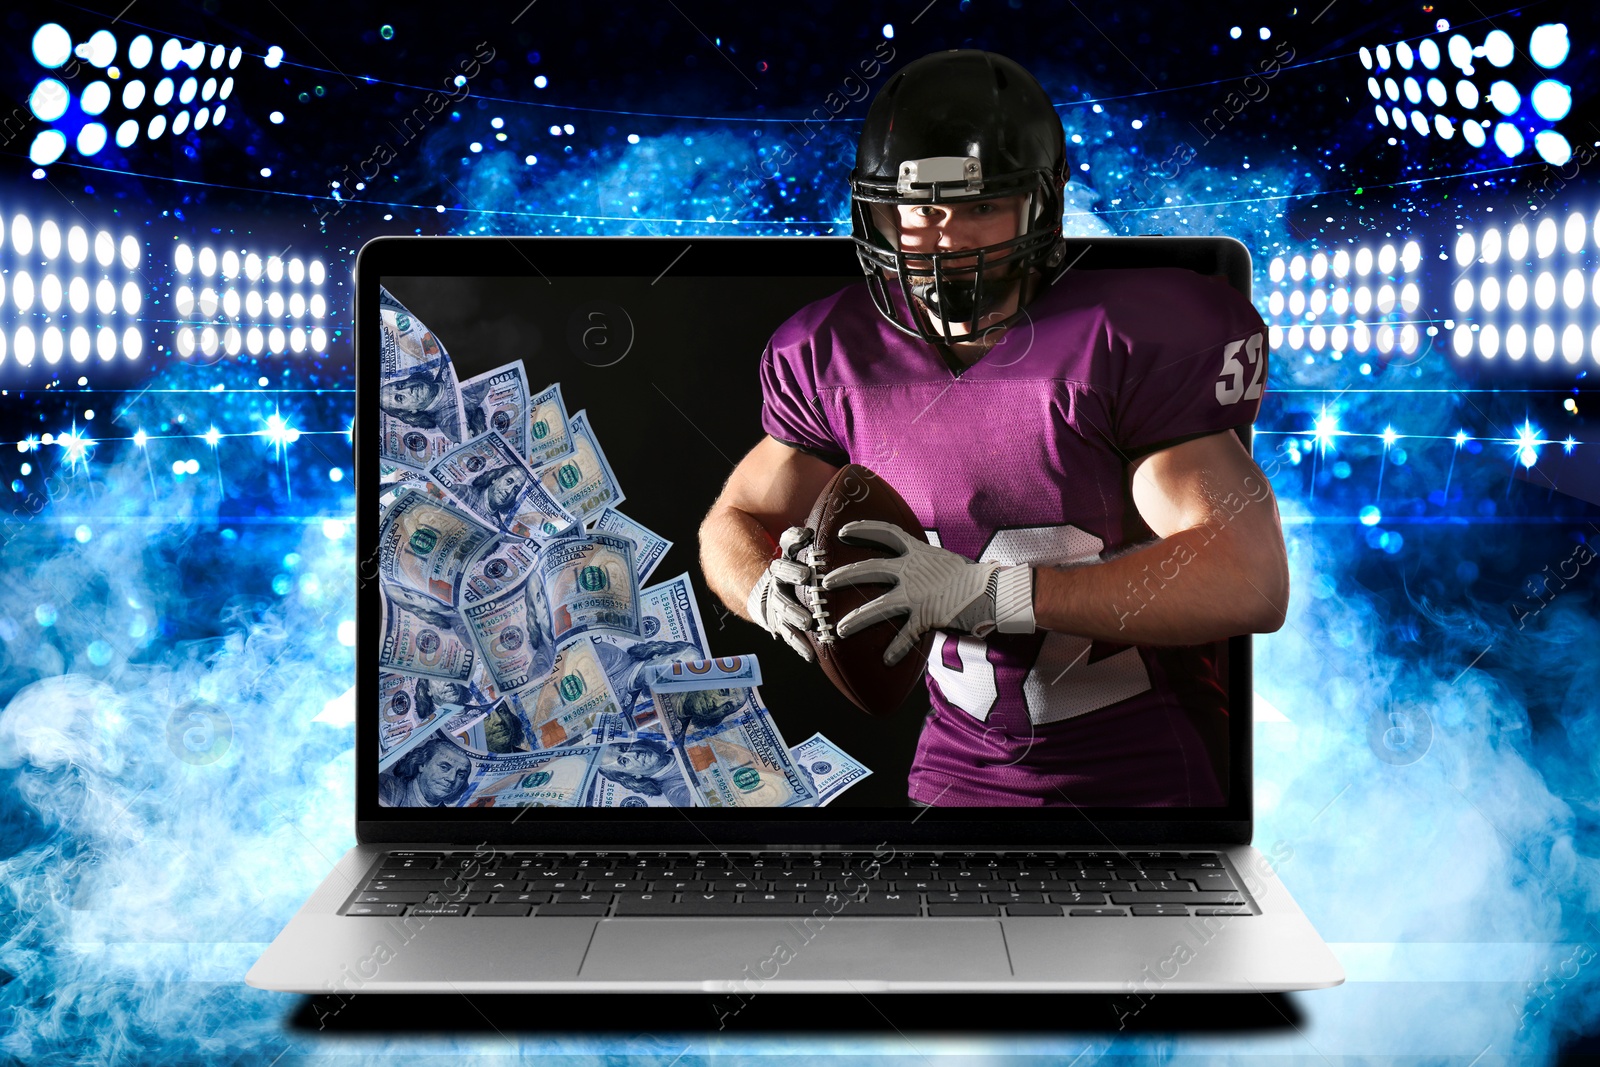 Image of Sports betting. American football player with ball appearing from laptop under stadium lights. Money on device screen